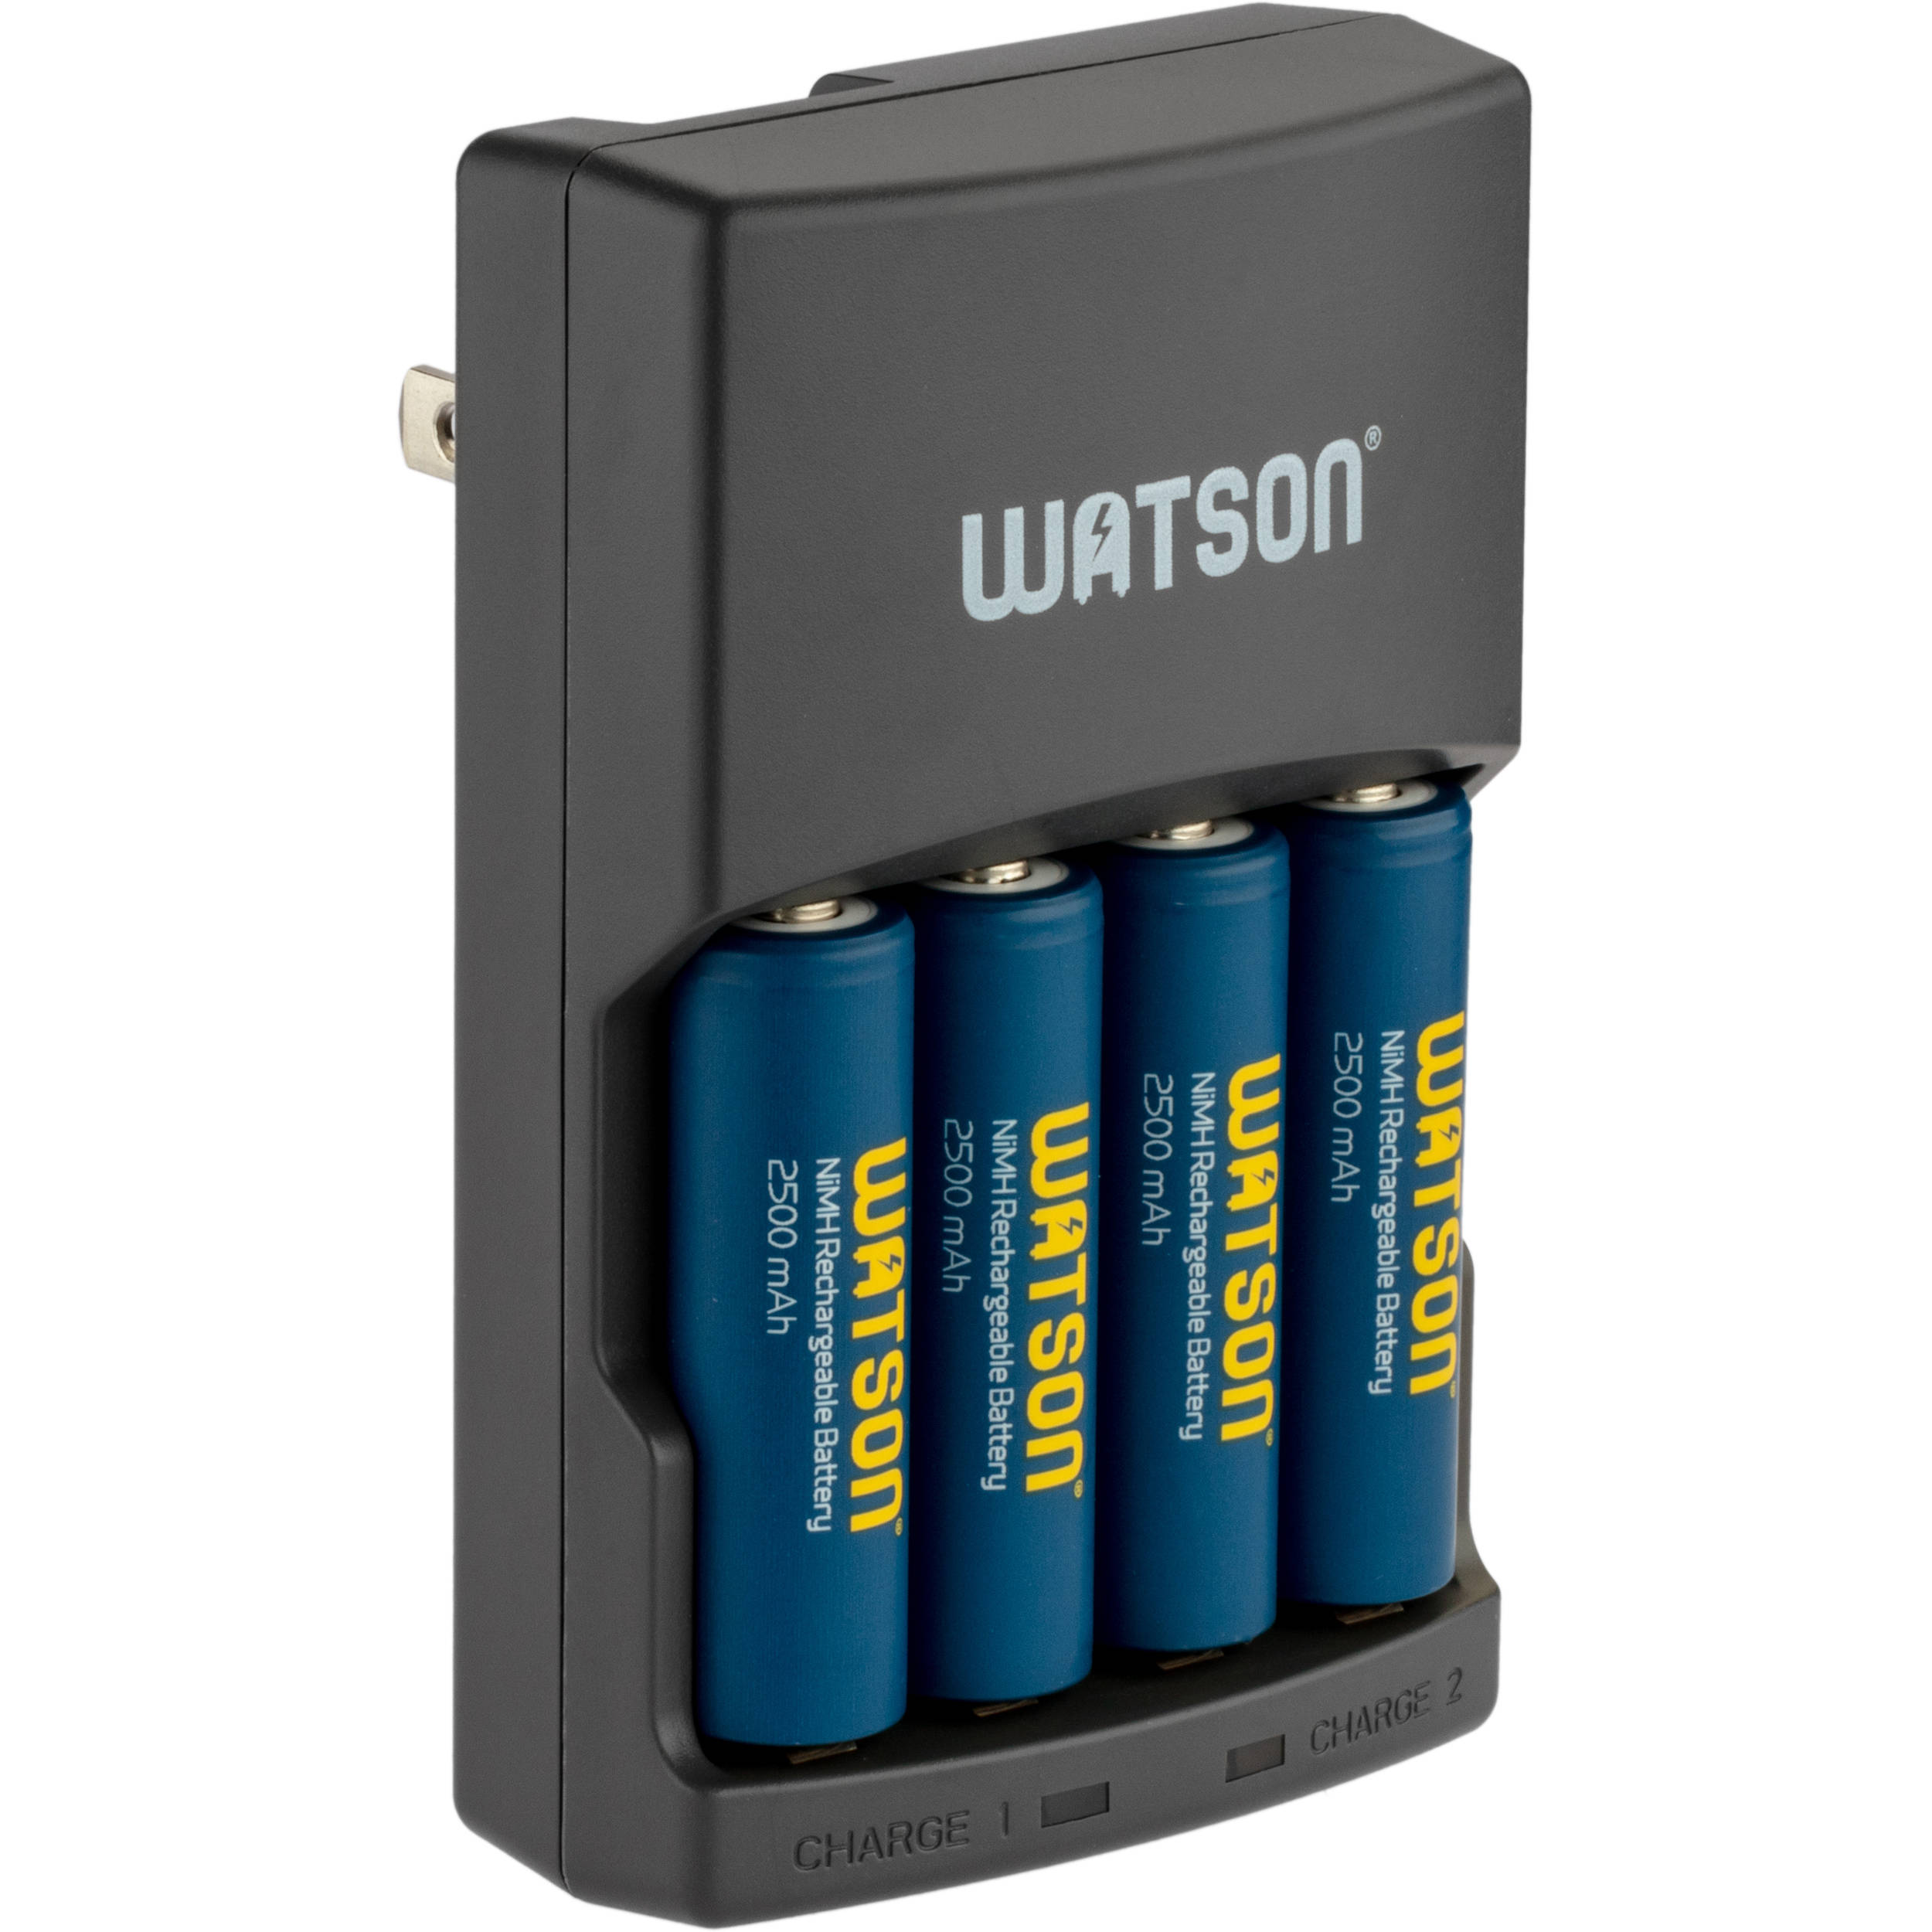 rechargeable batteries offers